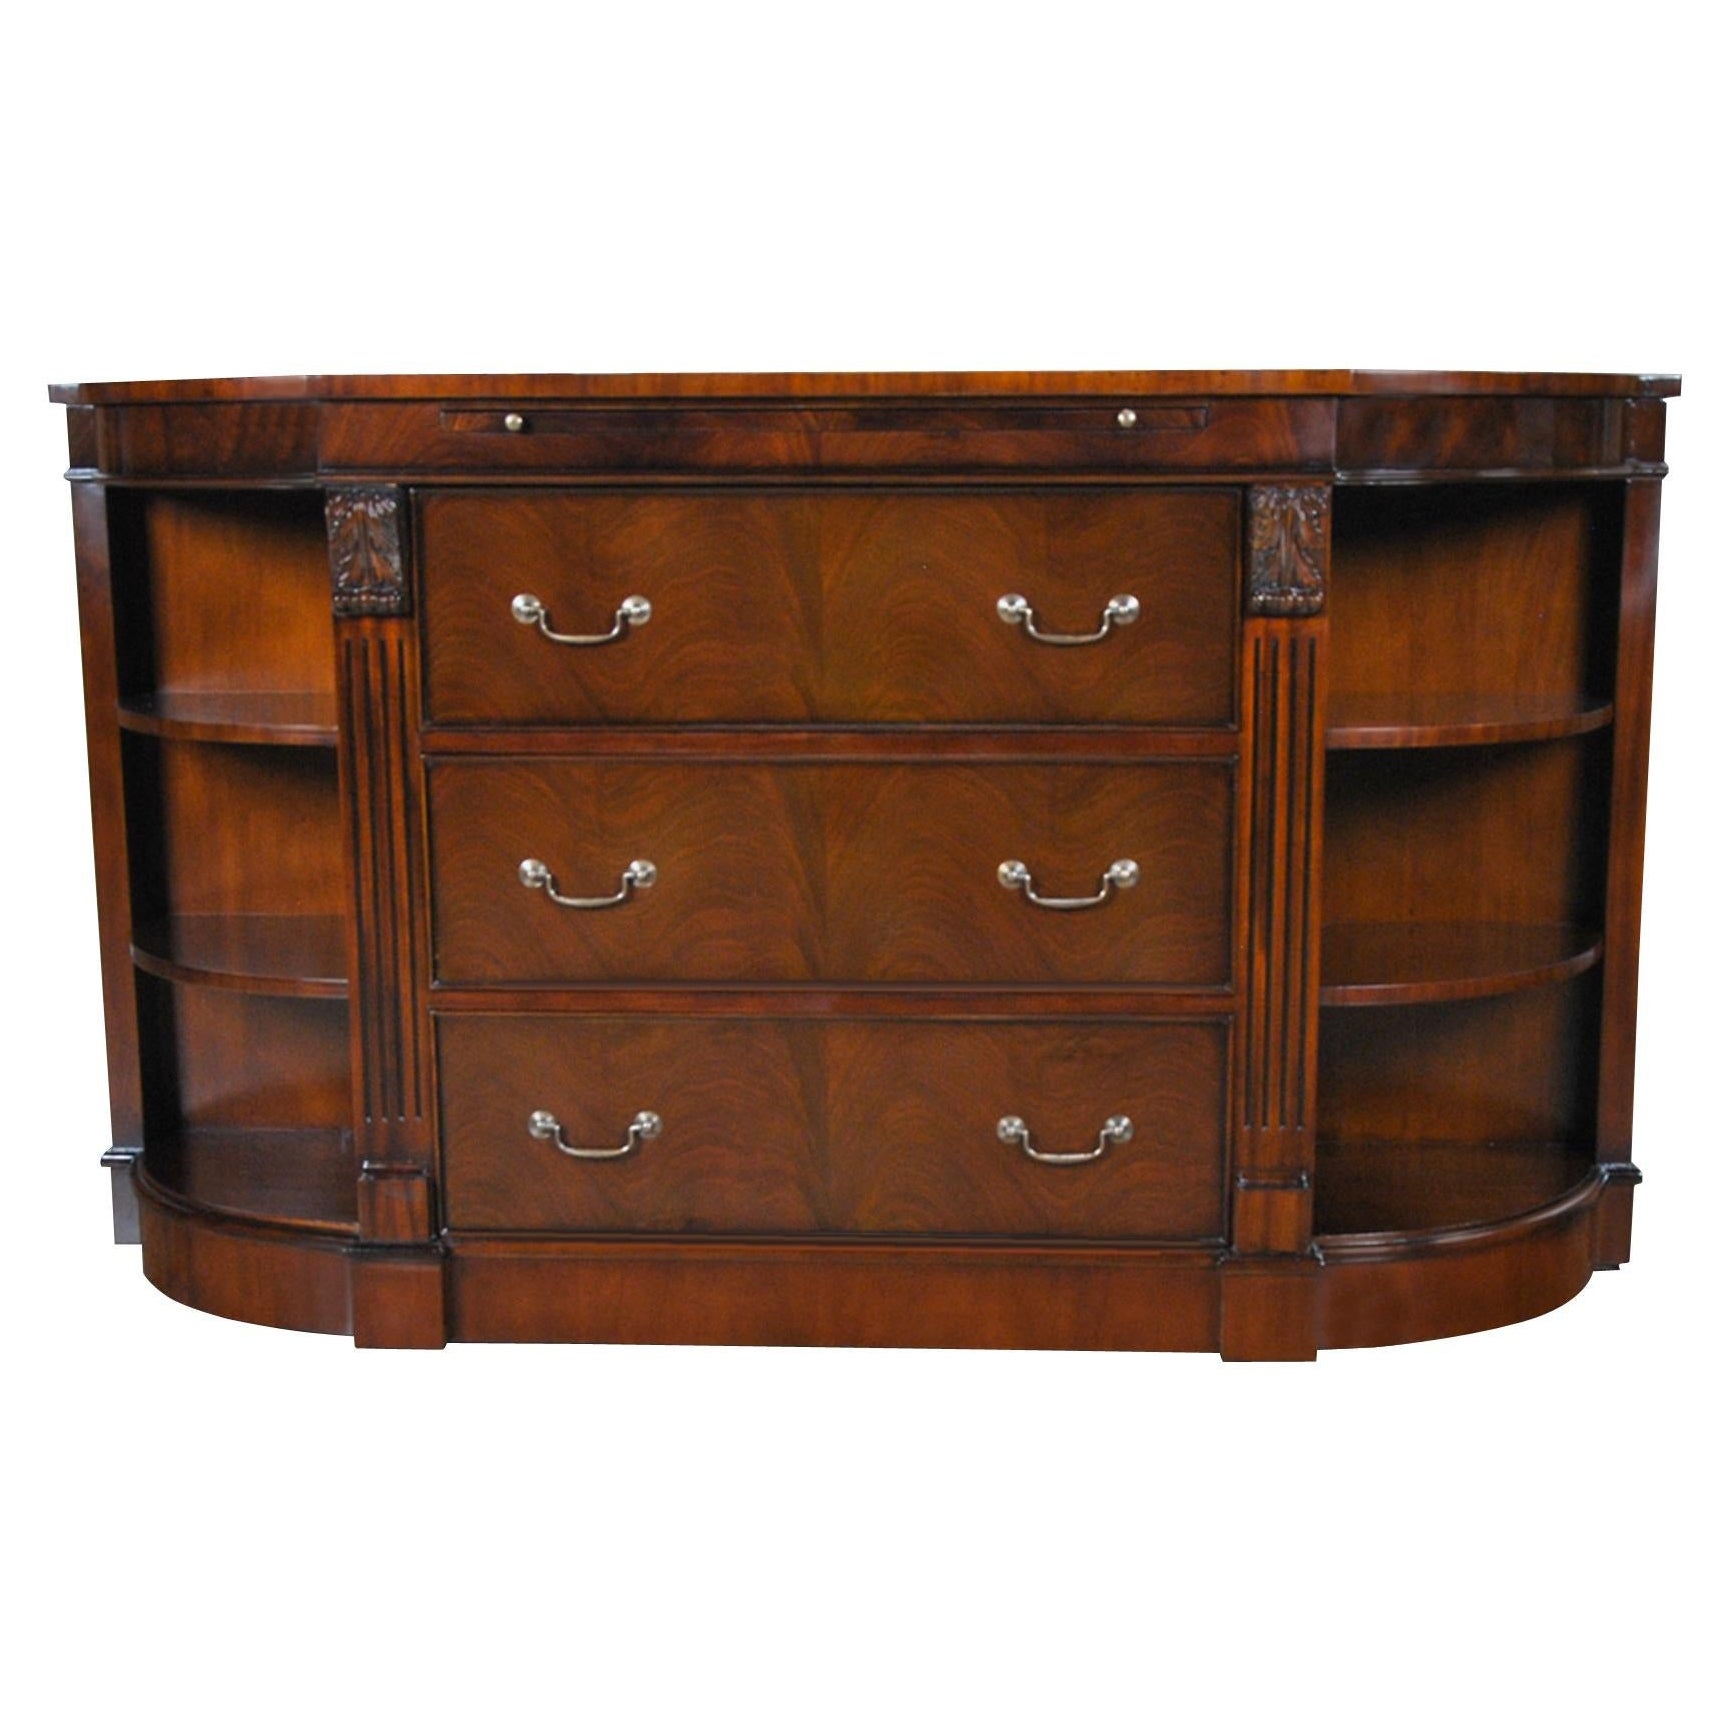 Mahogany Credenza with Pullout Slide